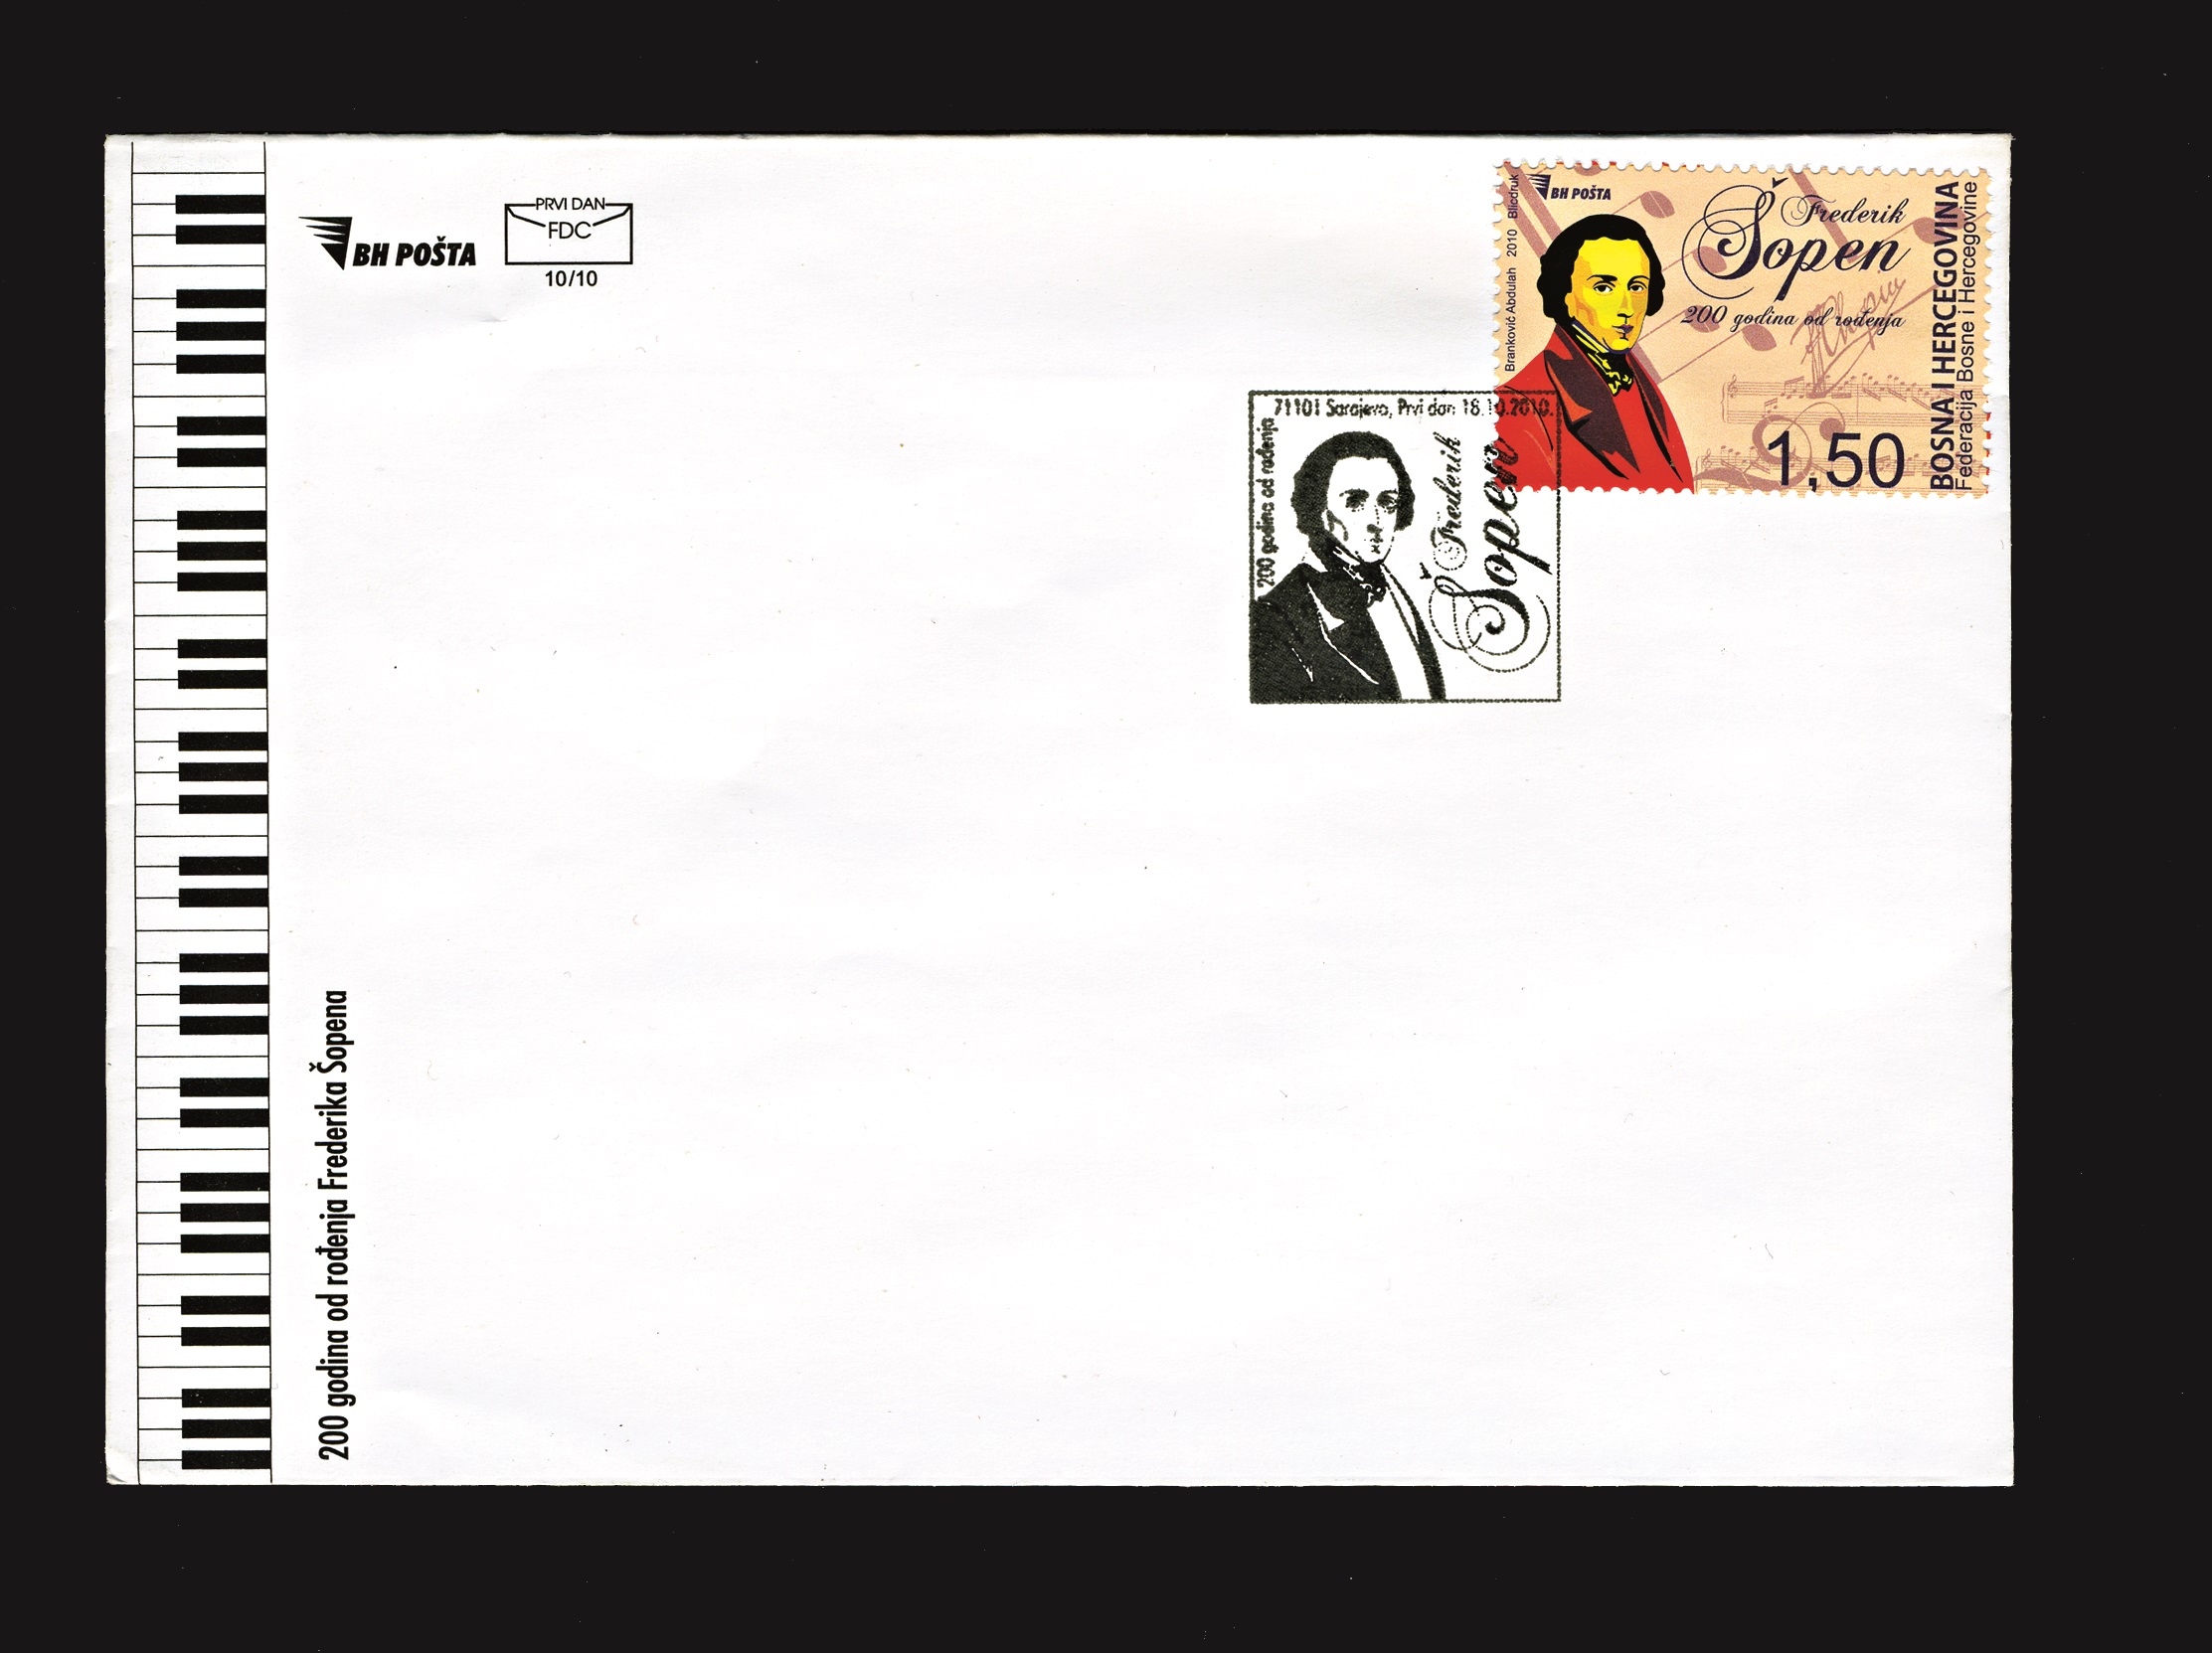 music---2nd-centennial-of-frederic-chopin-fdc